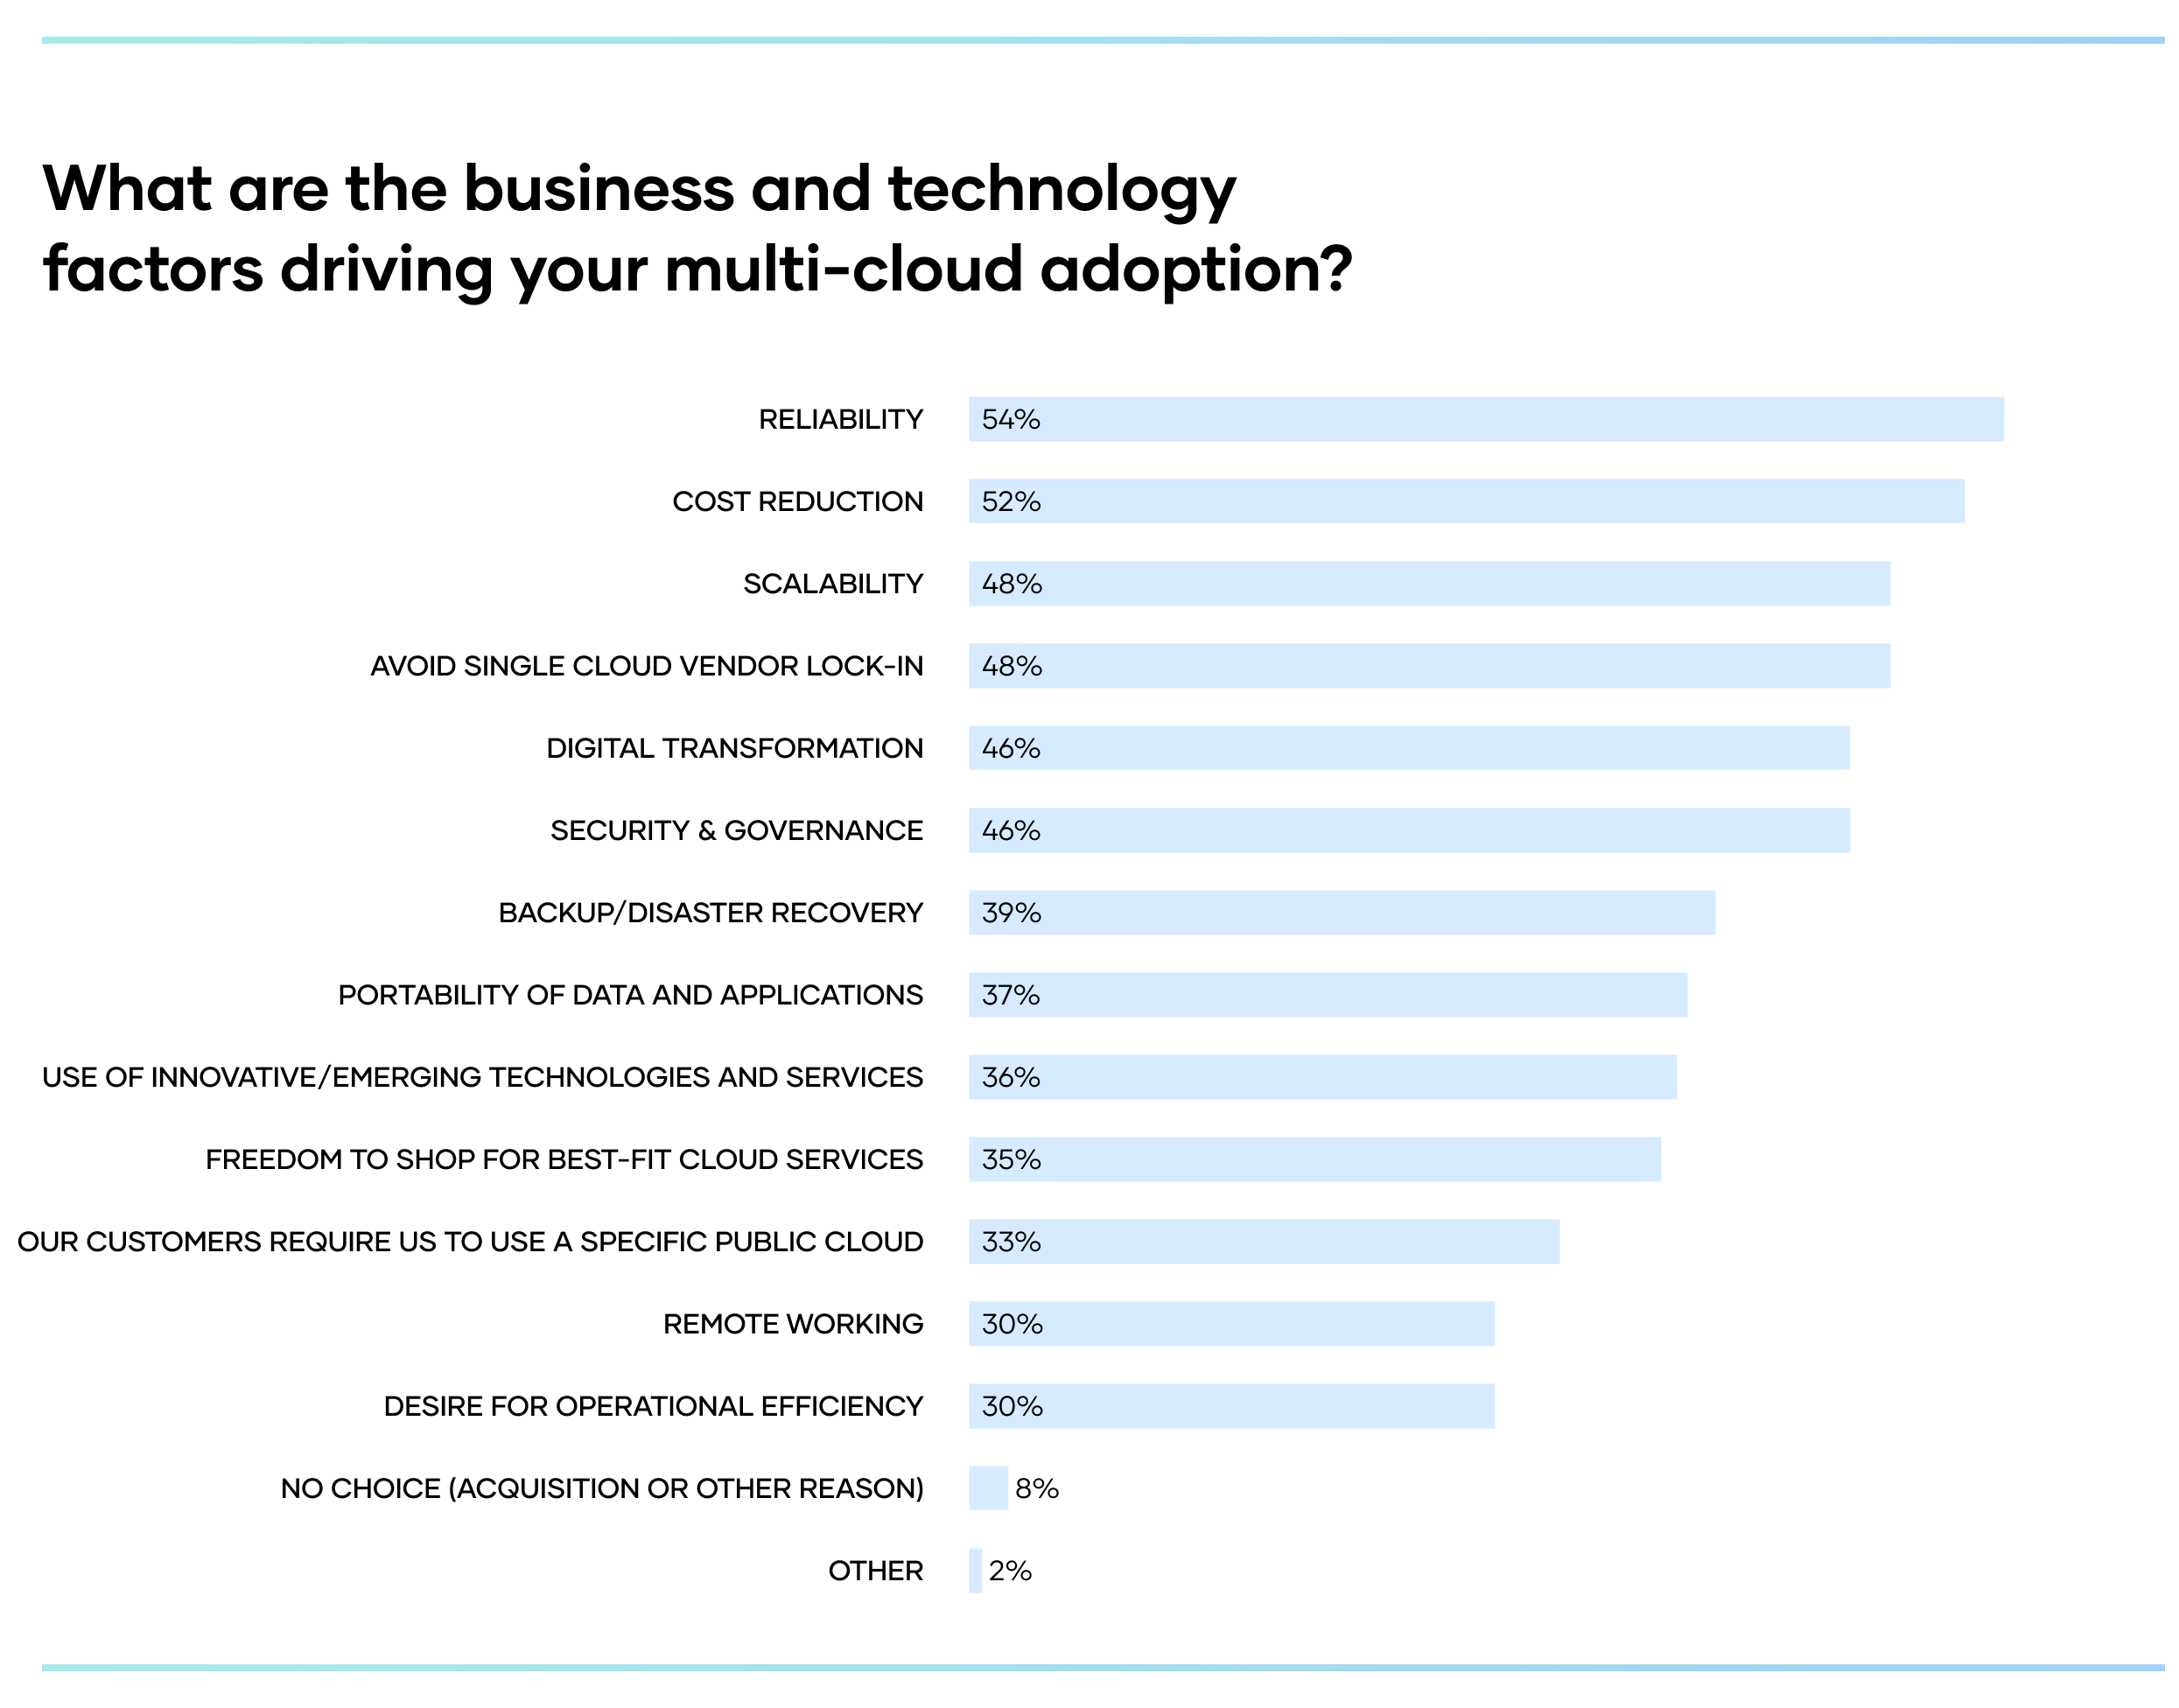 bar chart: business and technology factors driving multi-cloud adoption